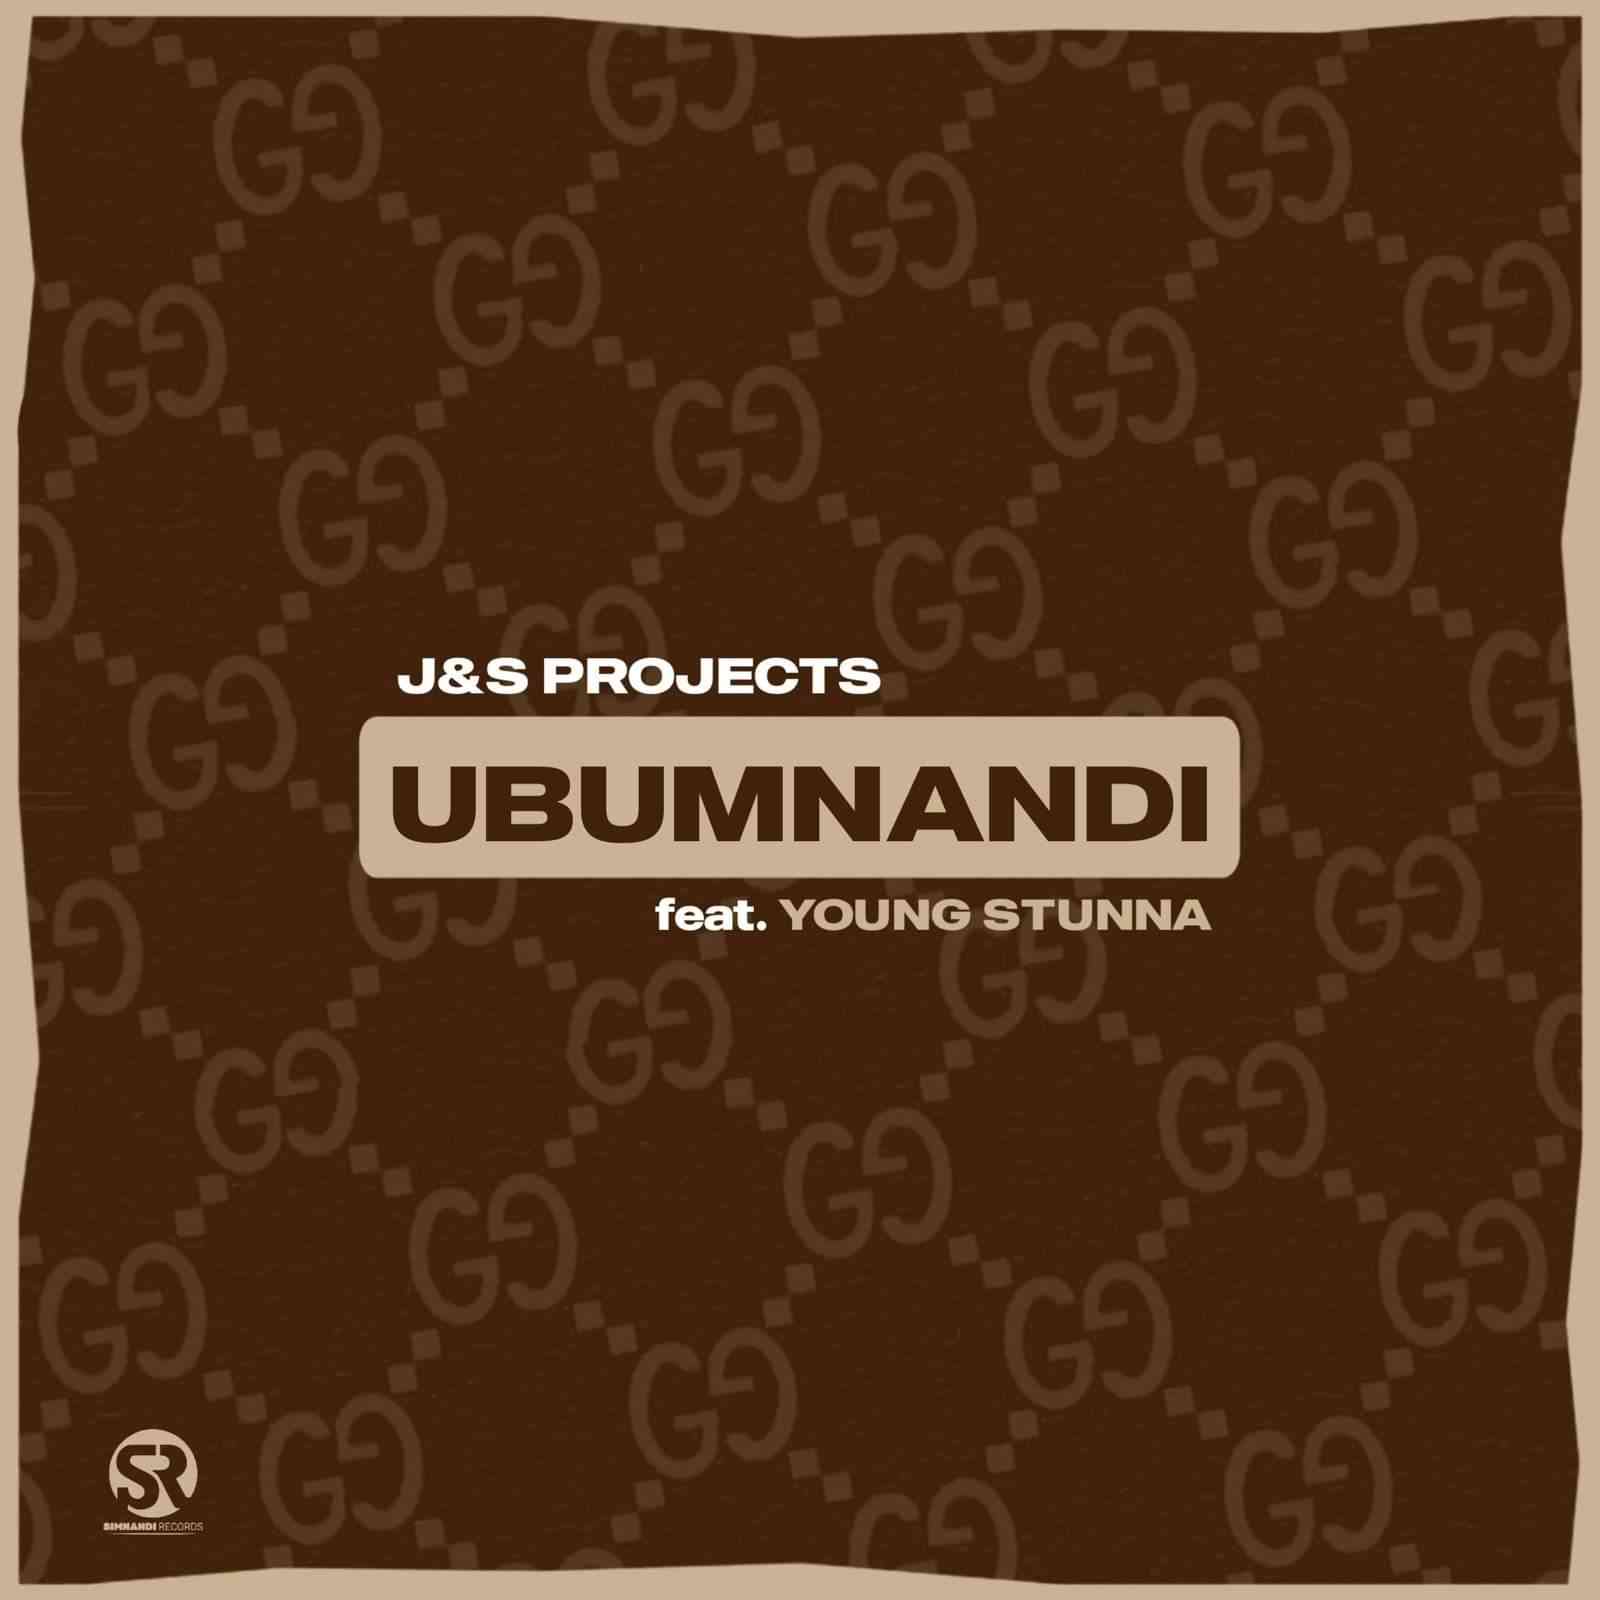 J & S Projects Ft.Young Stunna Ubumnandi